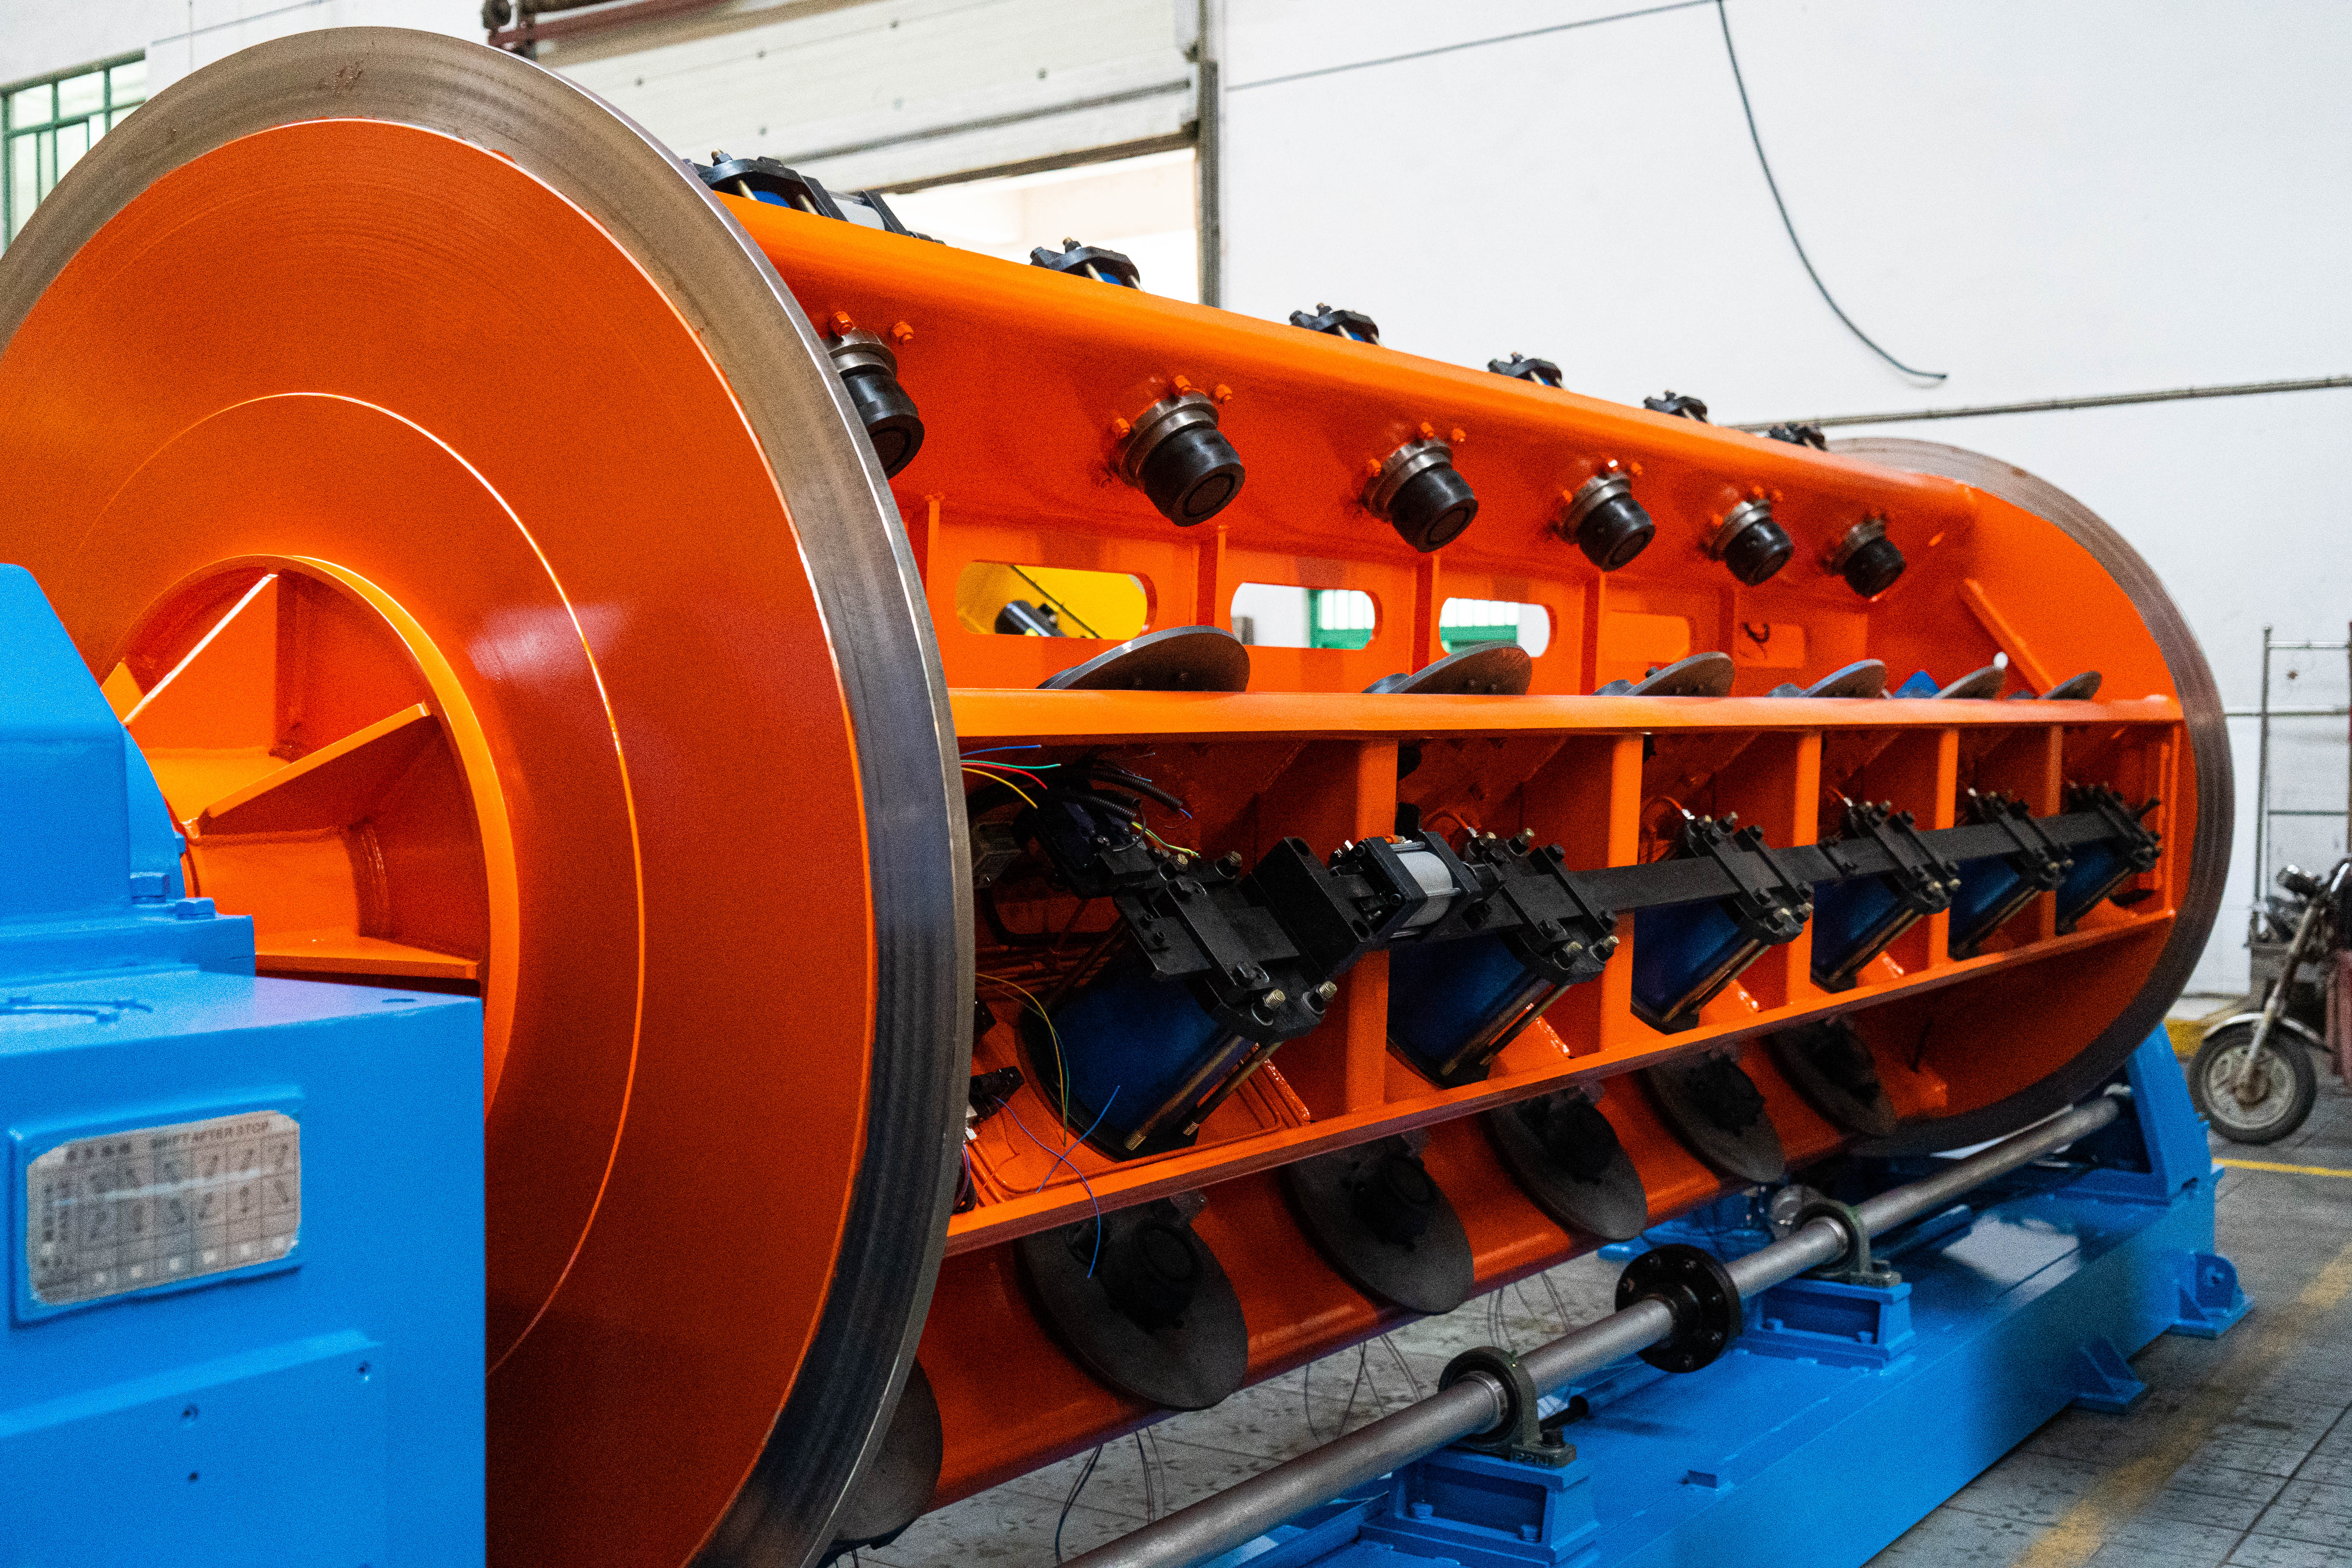 Introduction of Conductor Stranding Machine such as Tubular Stranding Machine, Rigid Frame Stranding Machine, Planetary Stranding Machine, etc.